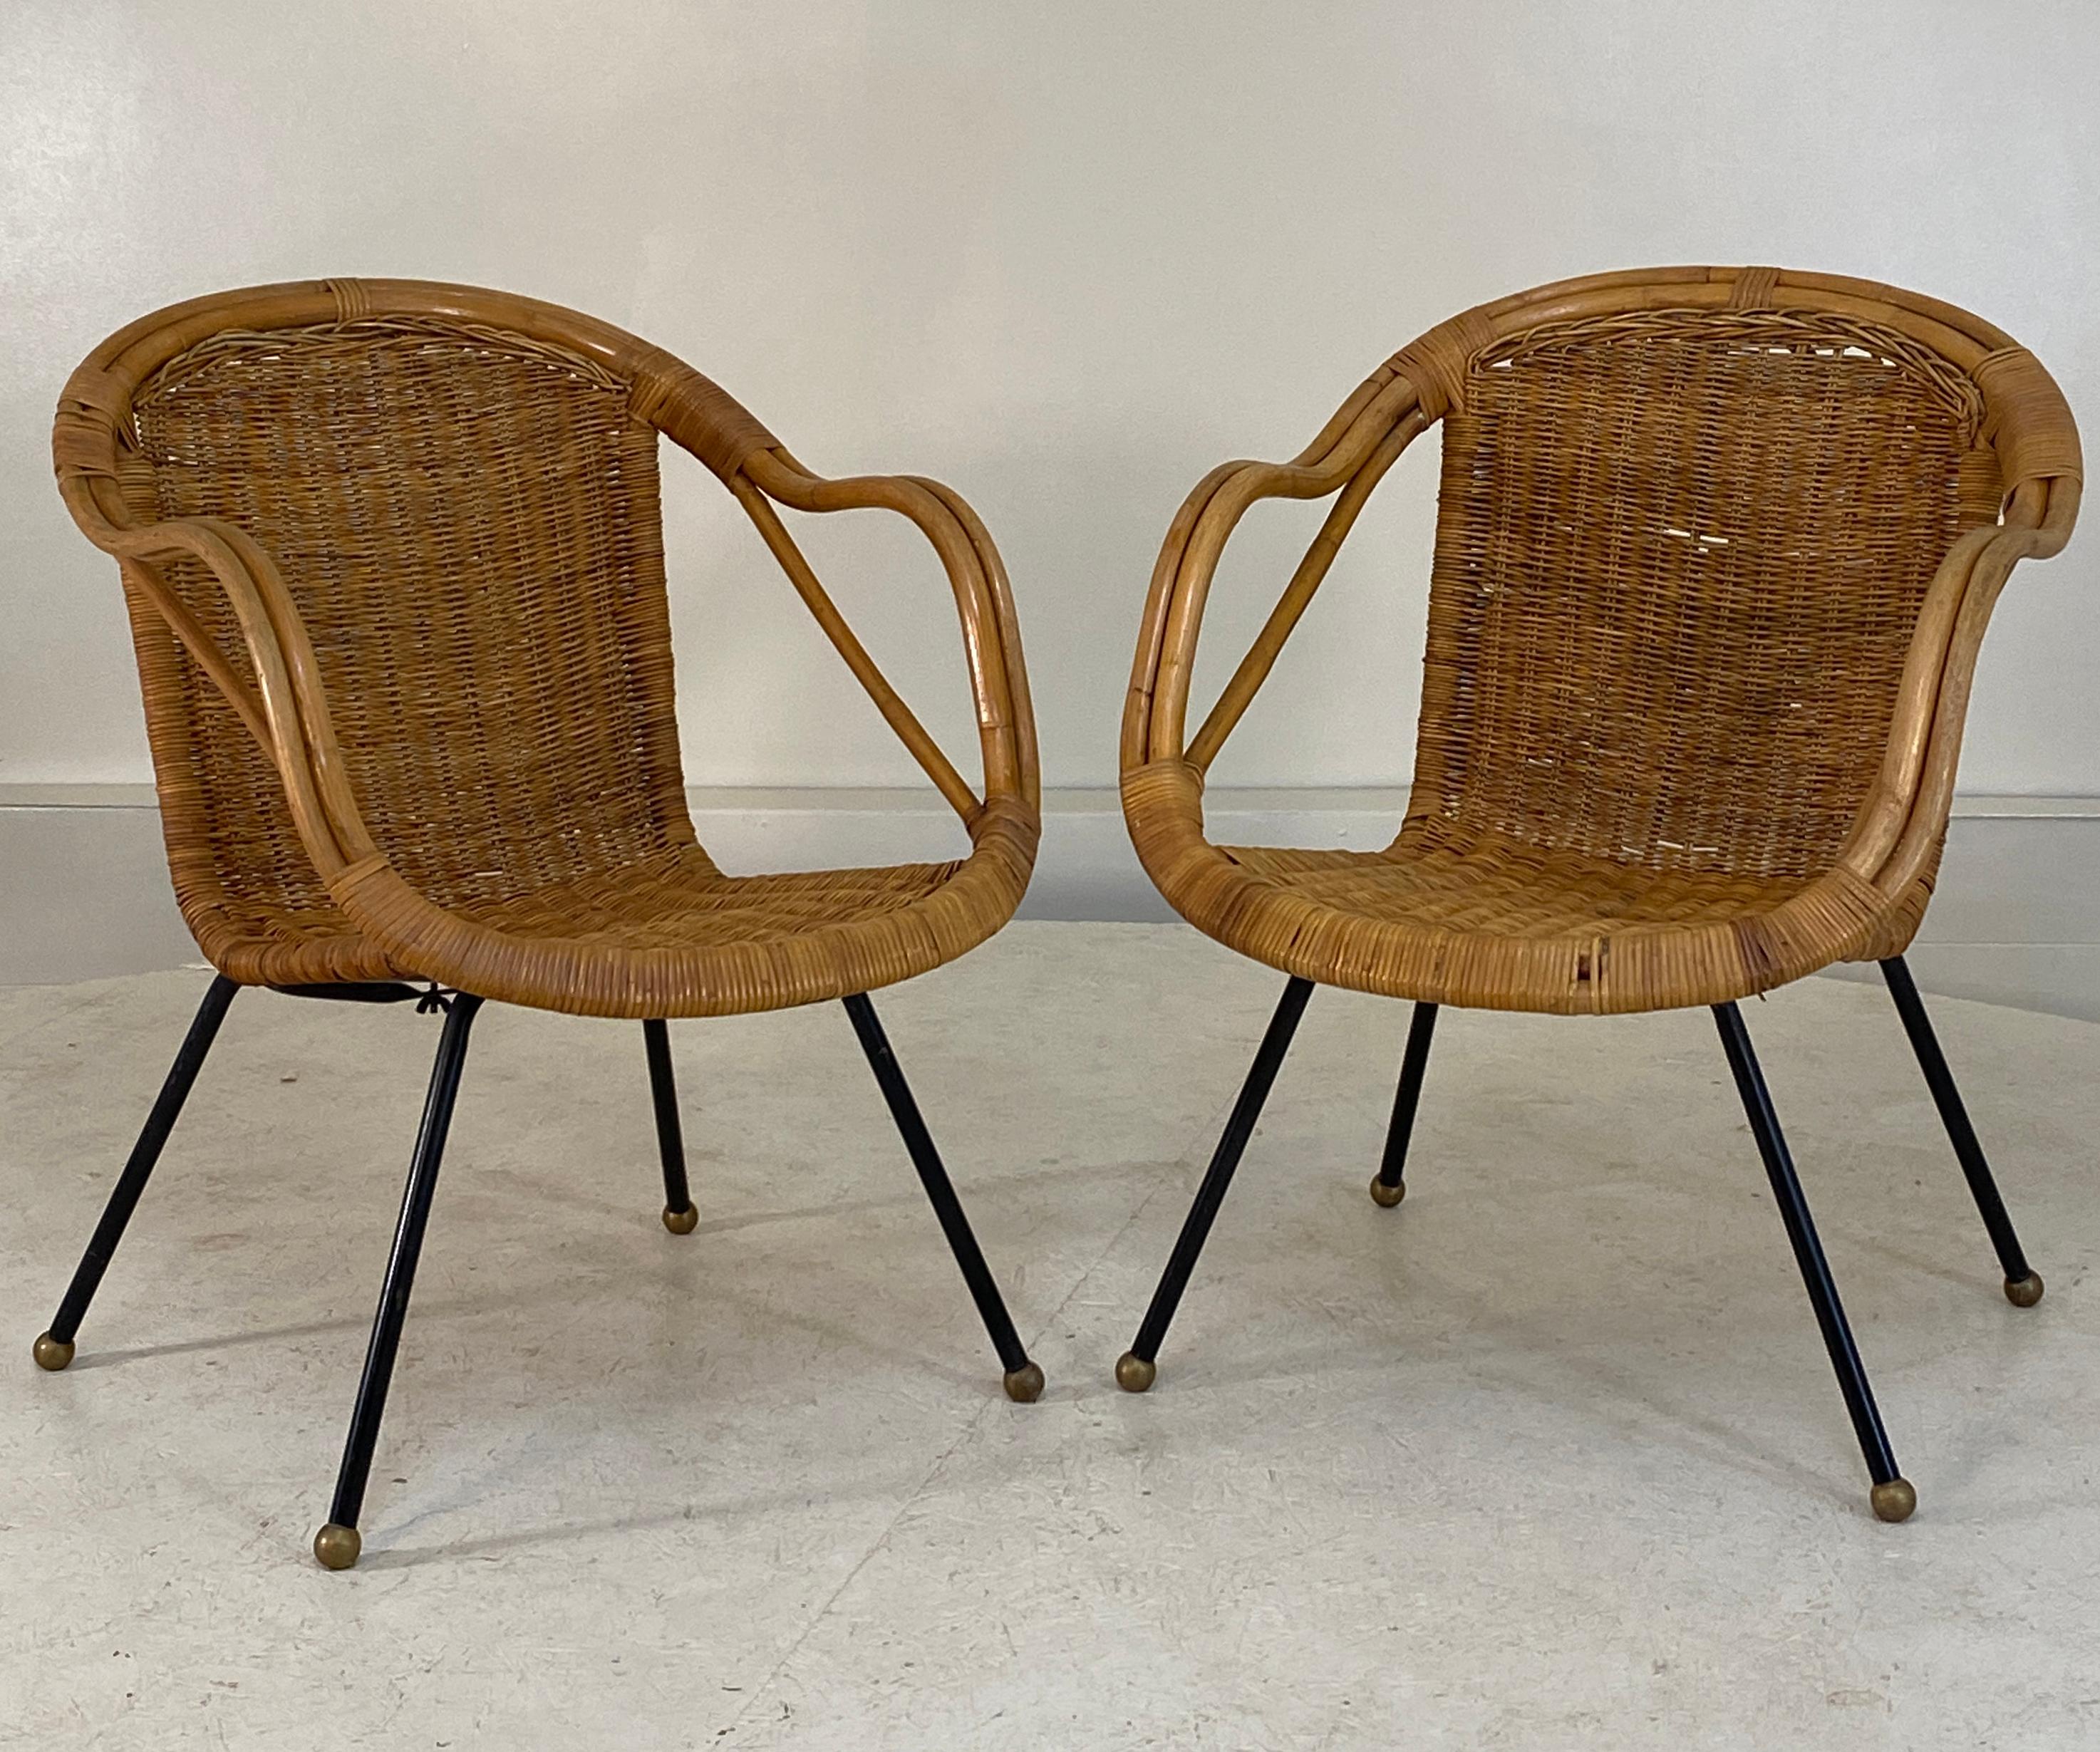 These are loved chairs and often sold and attributed to a vast number of designers from Jean Royere to Arthur Umanoff, of which none is correct. These are the first we have found with actual labels and they are from a little known company called